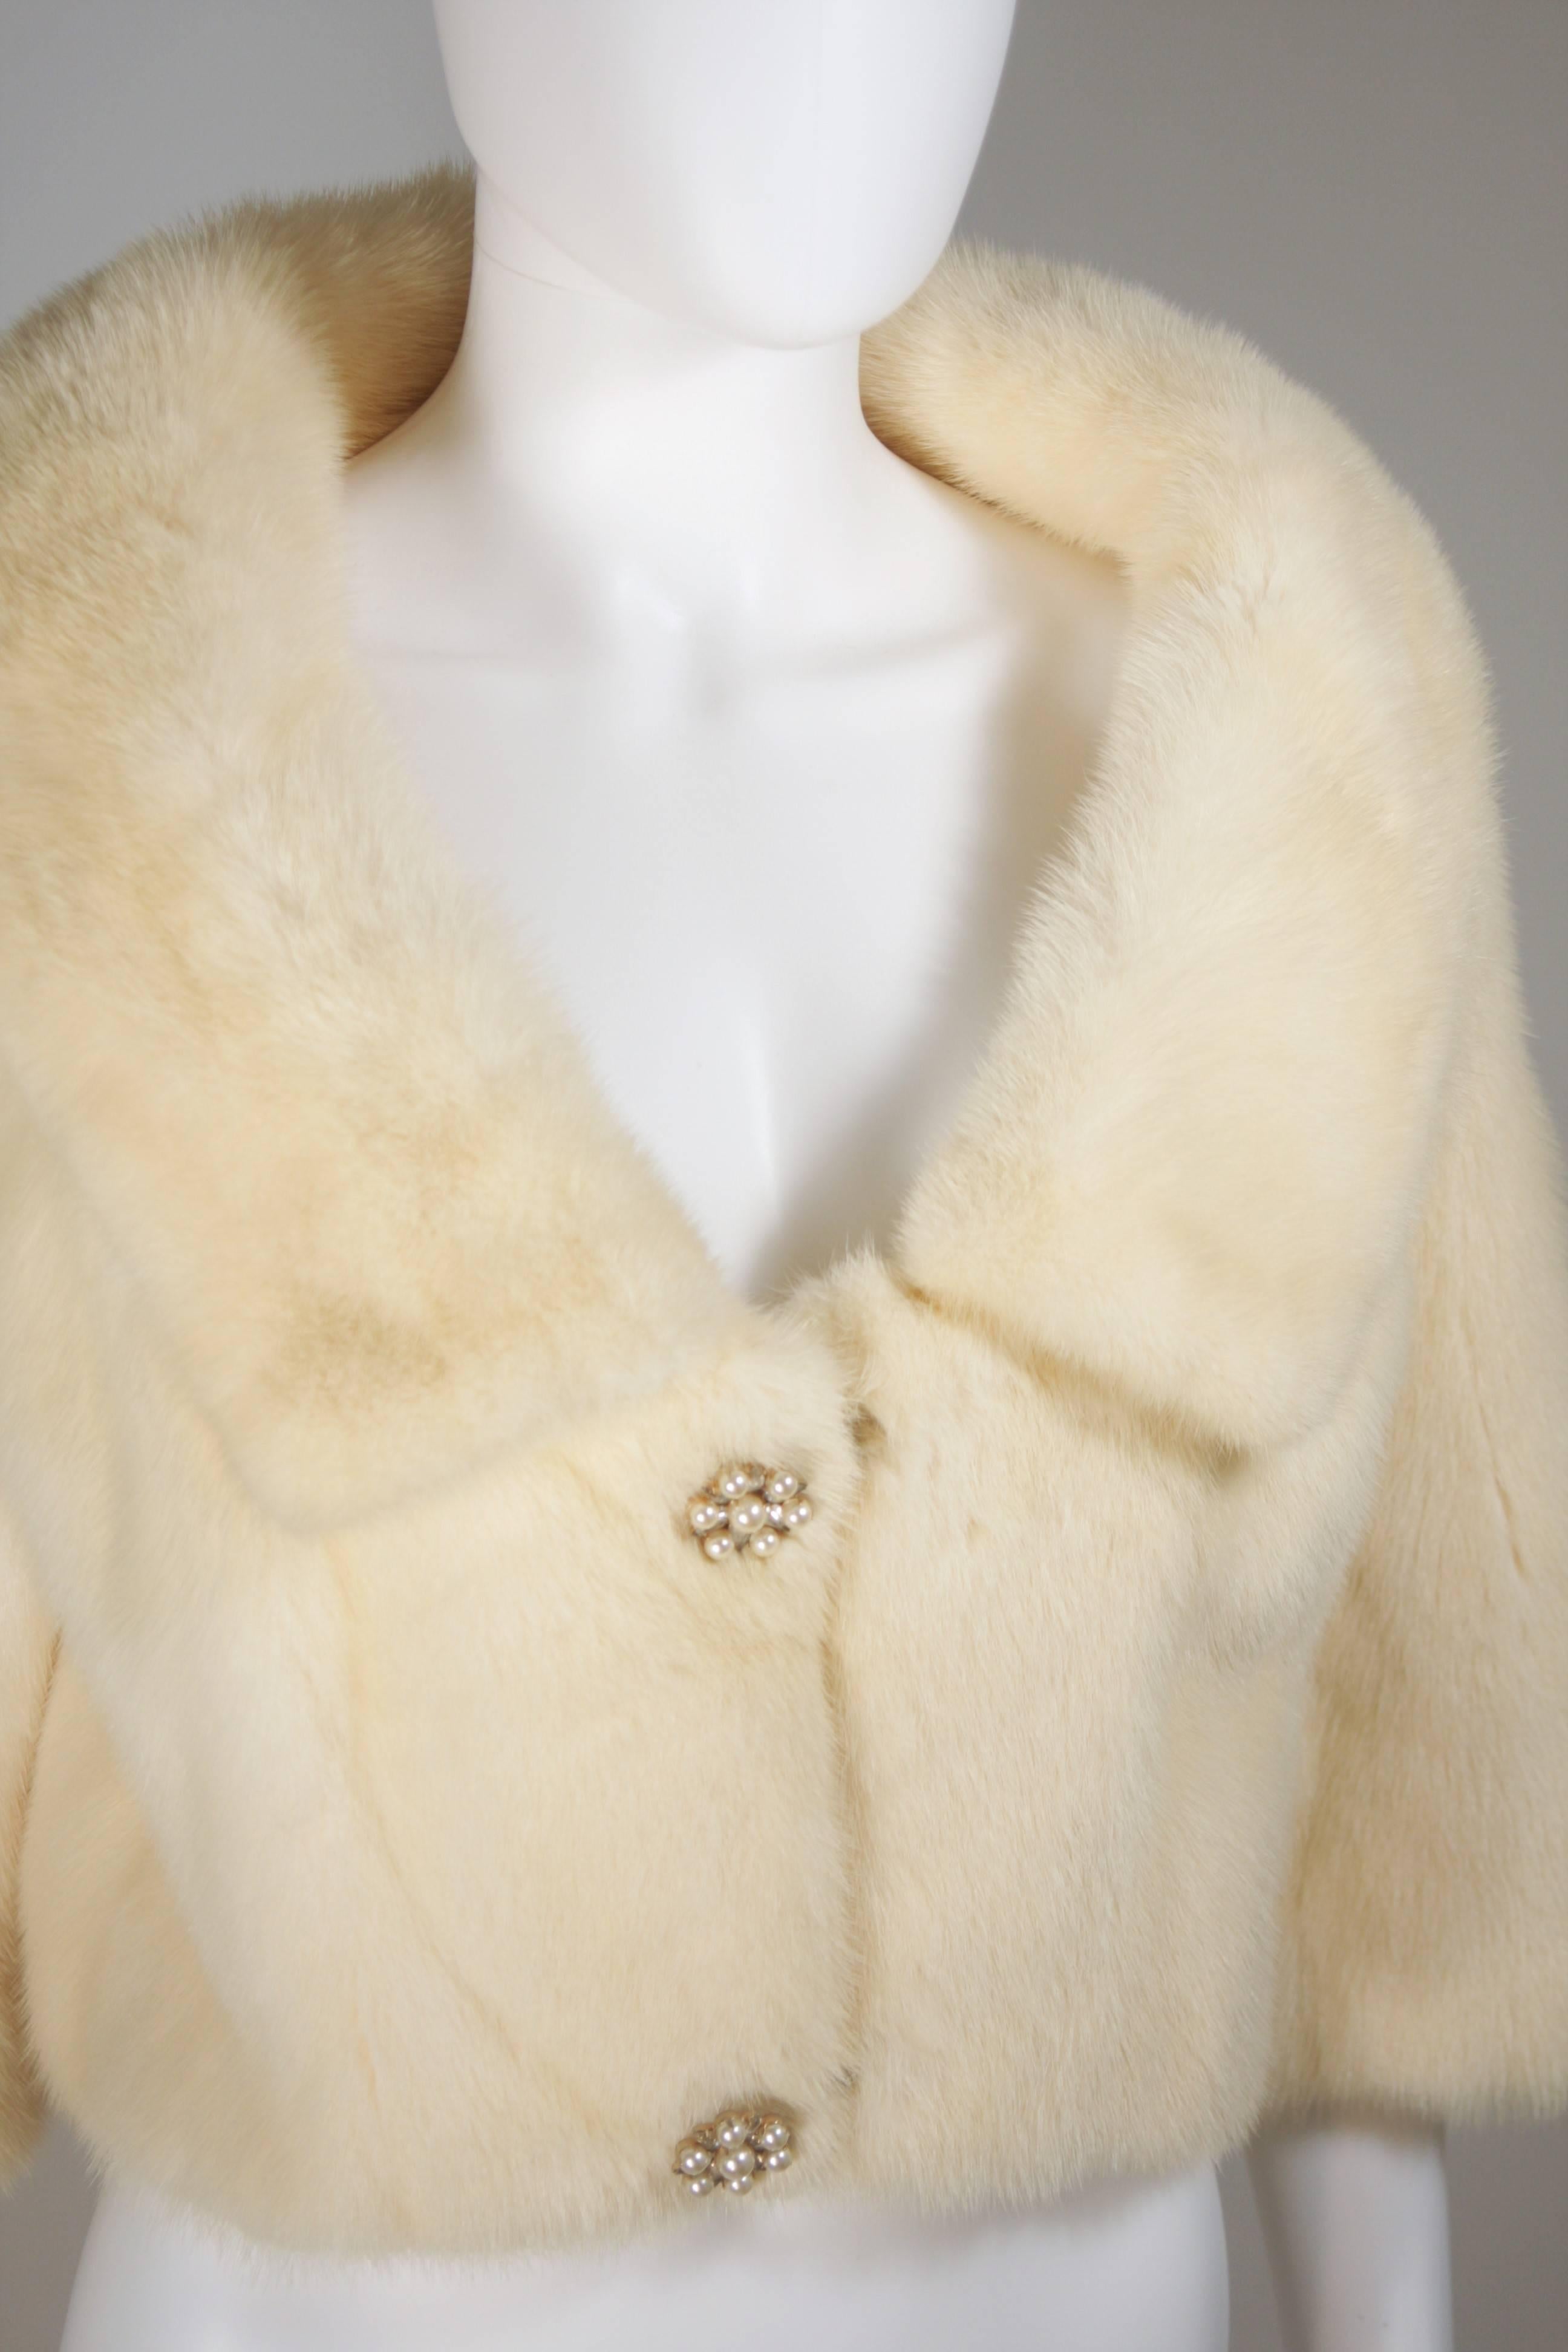 Beige OLEG CASSINI Cream Mink Jacket with Rhinestone & Faux Pearl Buttons Size 6-8 For Sale